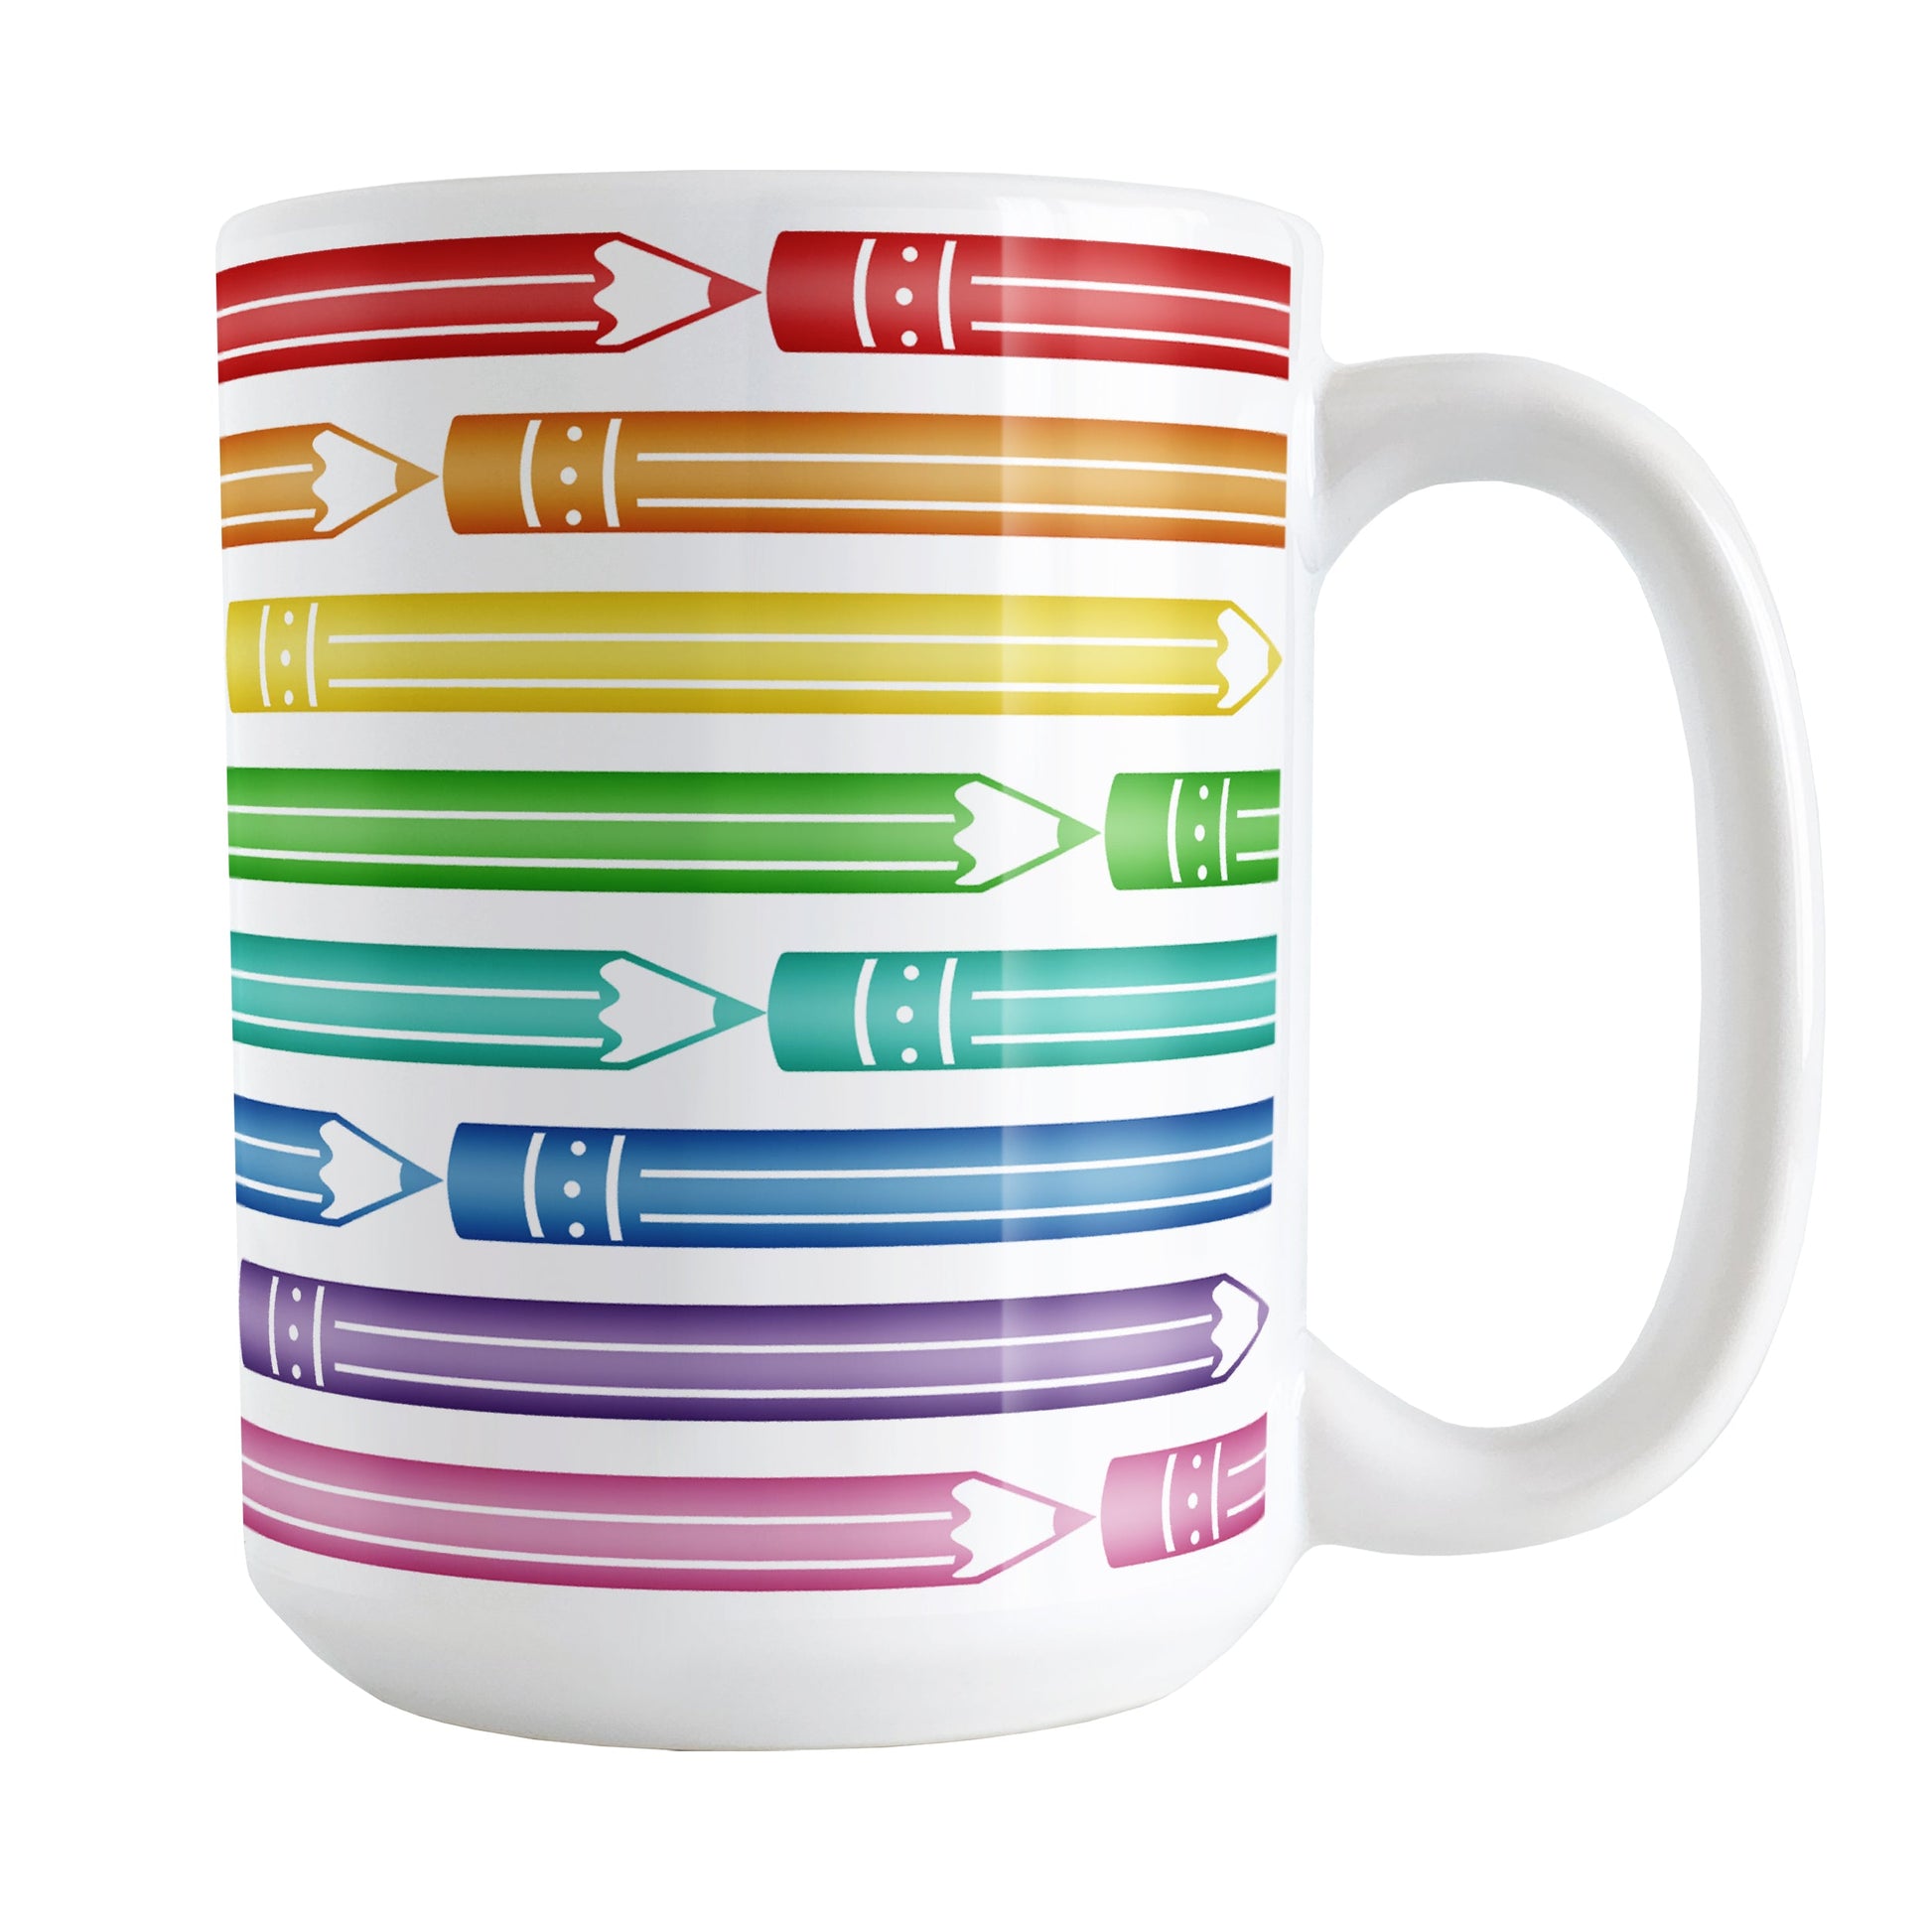 Colored Pencils Pattern Mug (15oz) at Amy's Coffee Mugs. A ceramic coffee mug designed with a pattern of colored pencils in stacked rows, in a rainbow progression, that wraps around the mug to the handle.